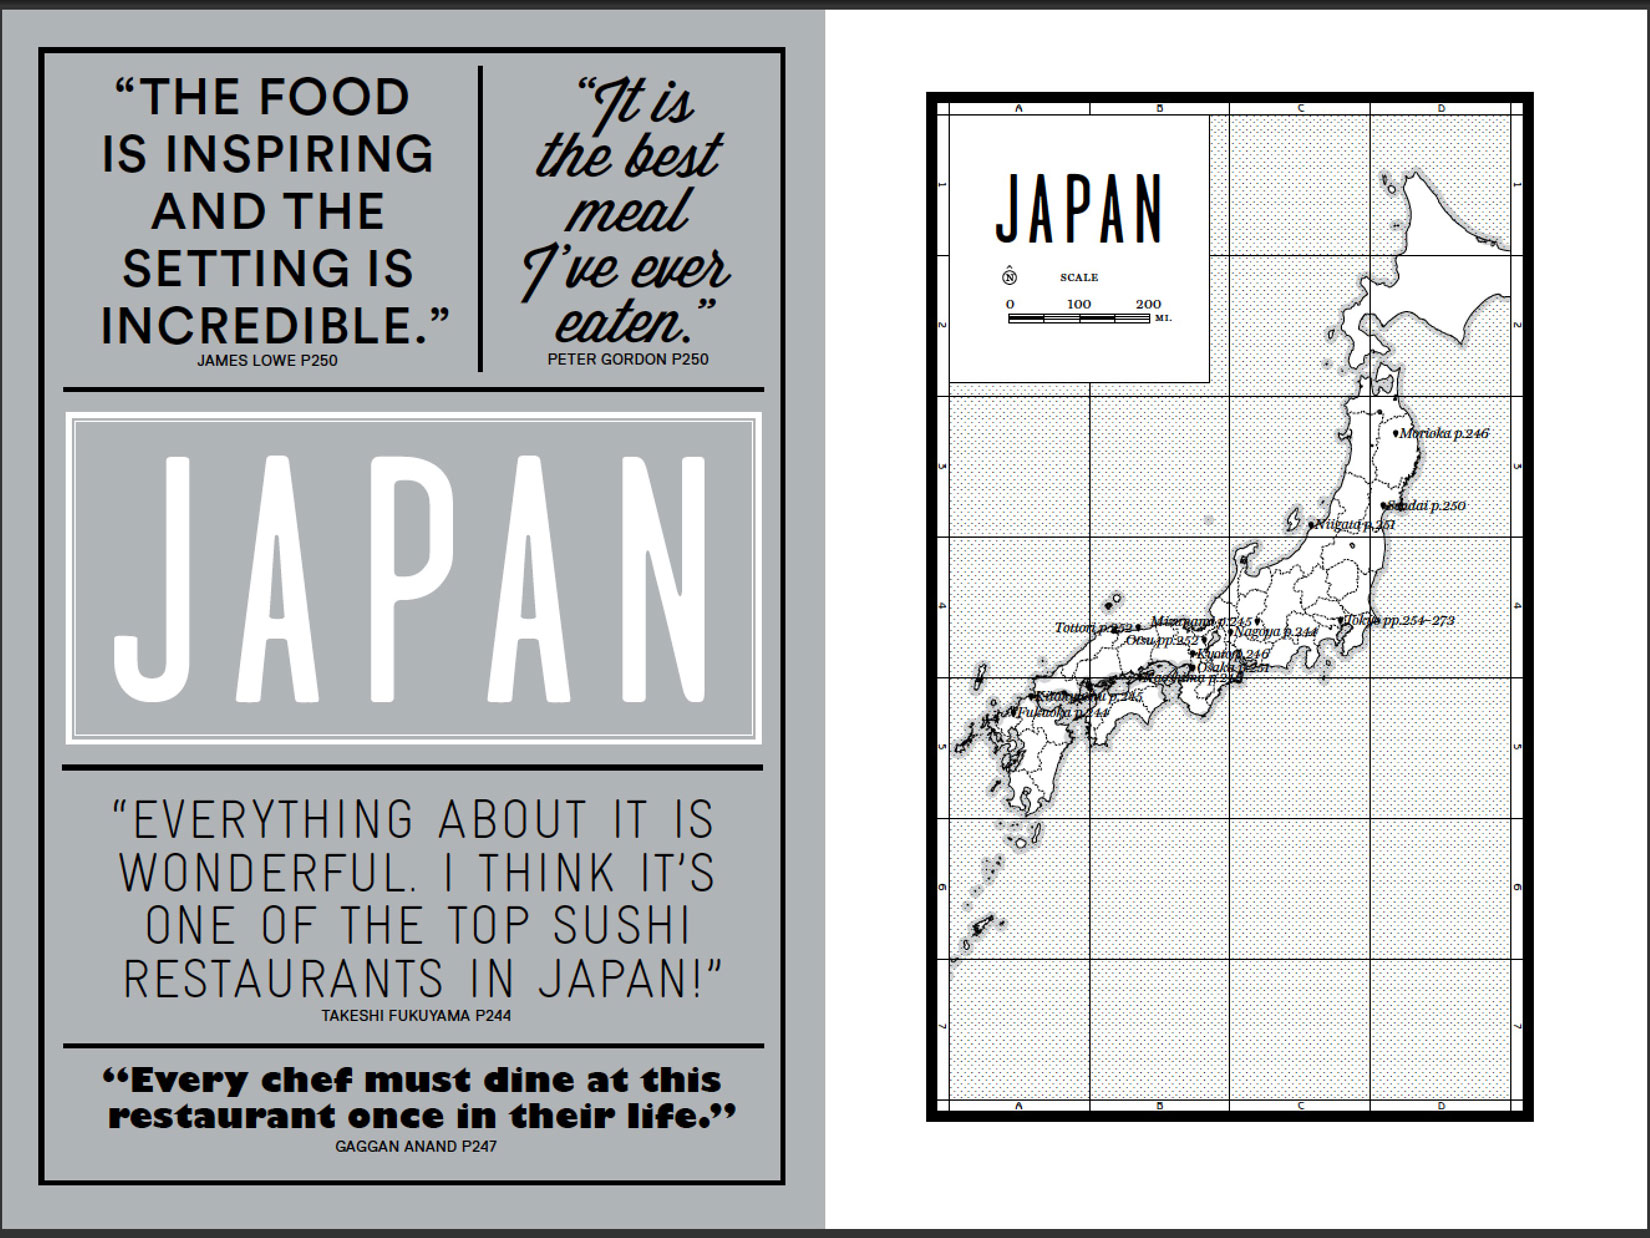 The Japan introduction from our new book Where Chefs Eat